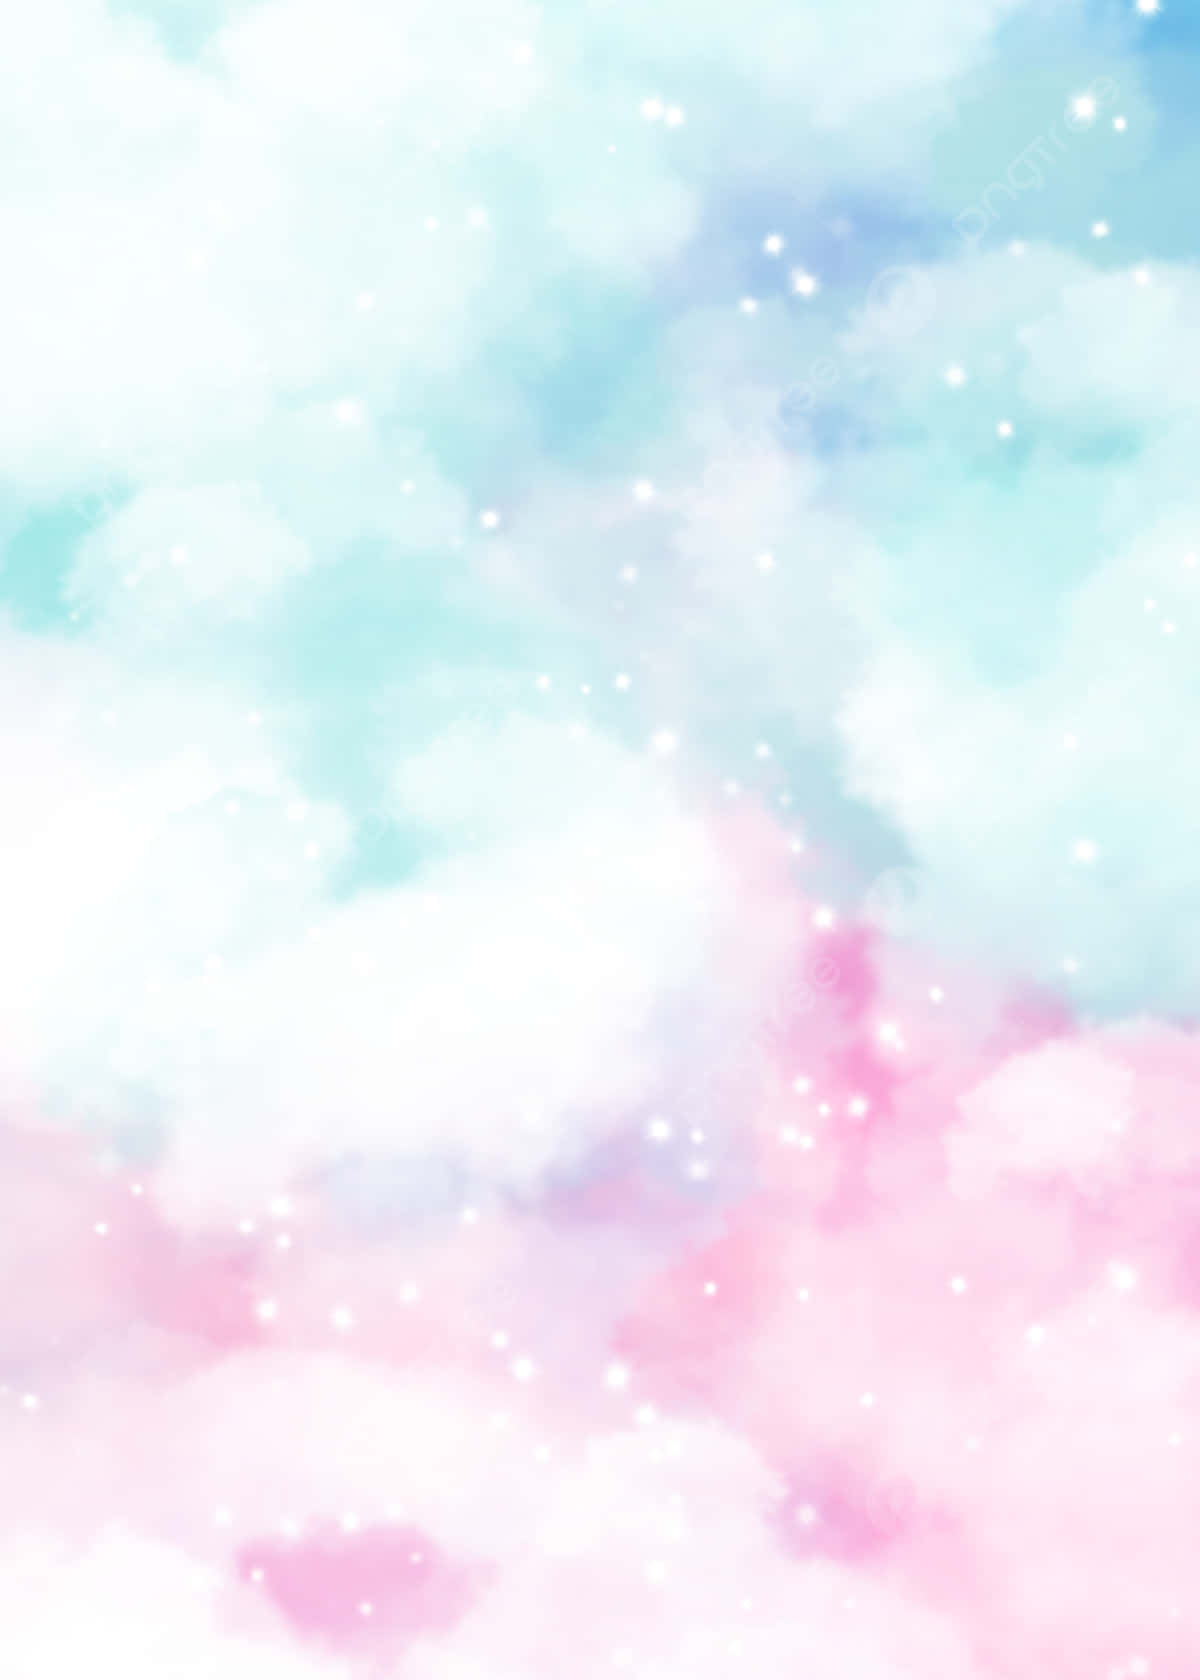 A beautiful sky of blended pink and blue clouds Wallpaper